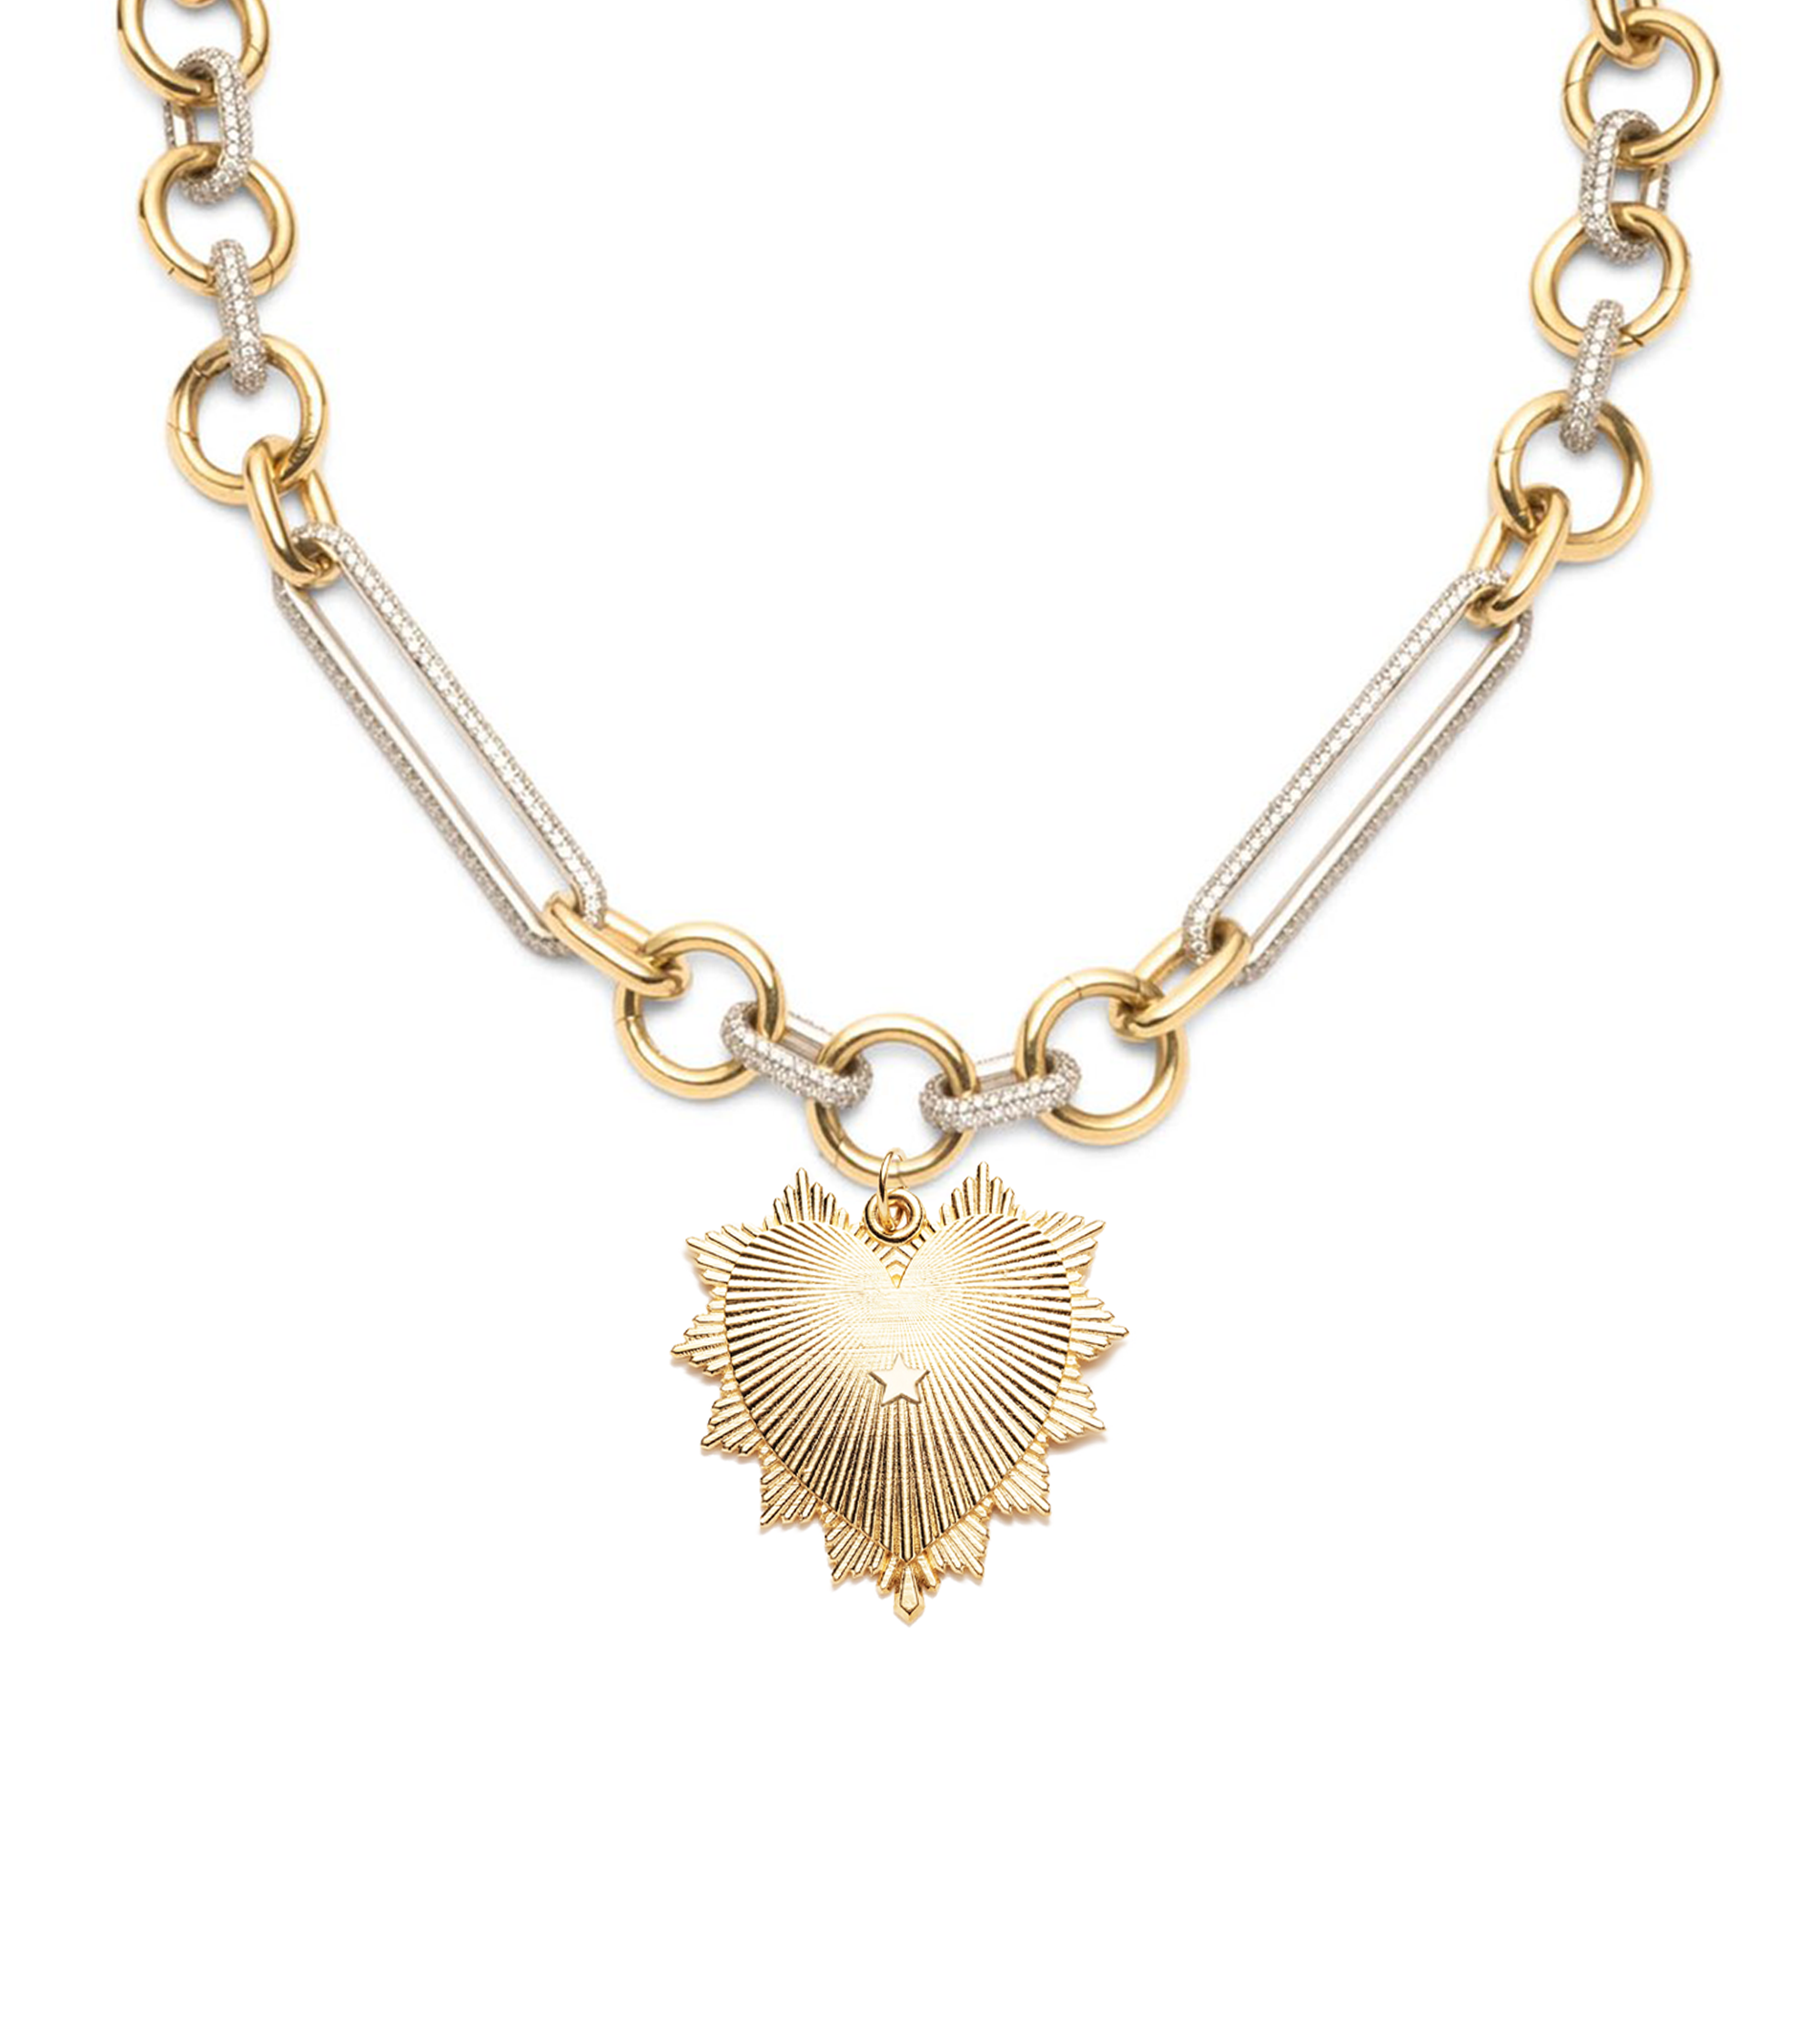 Extended Gold Heart Necklaces, Pendant Heart Necklaces – FoundRae